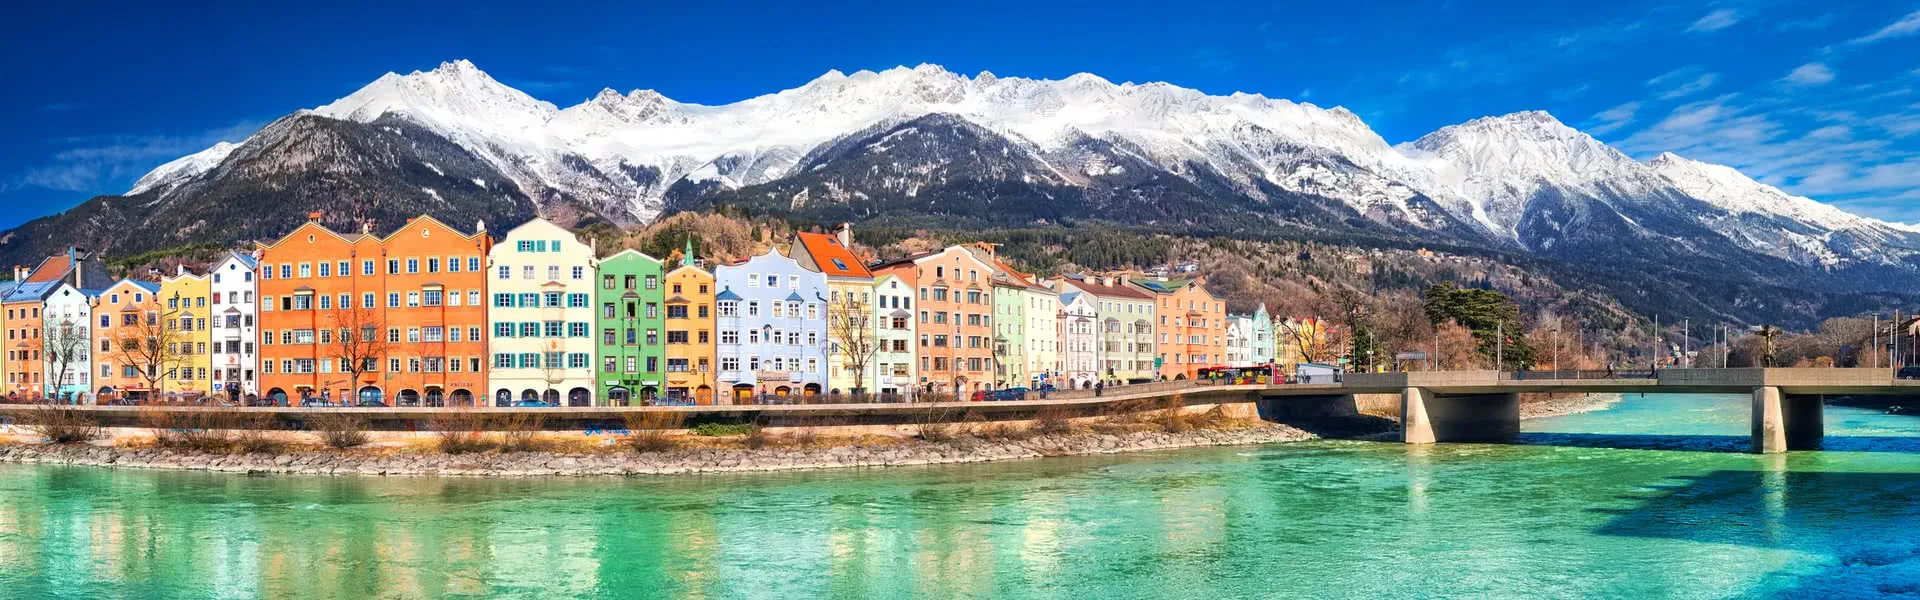 Meeting and conference location Innsbruck